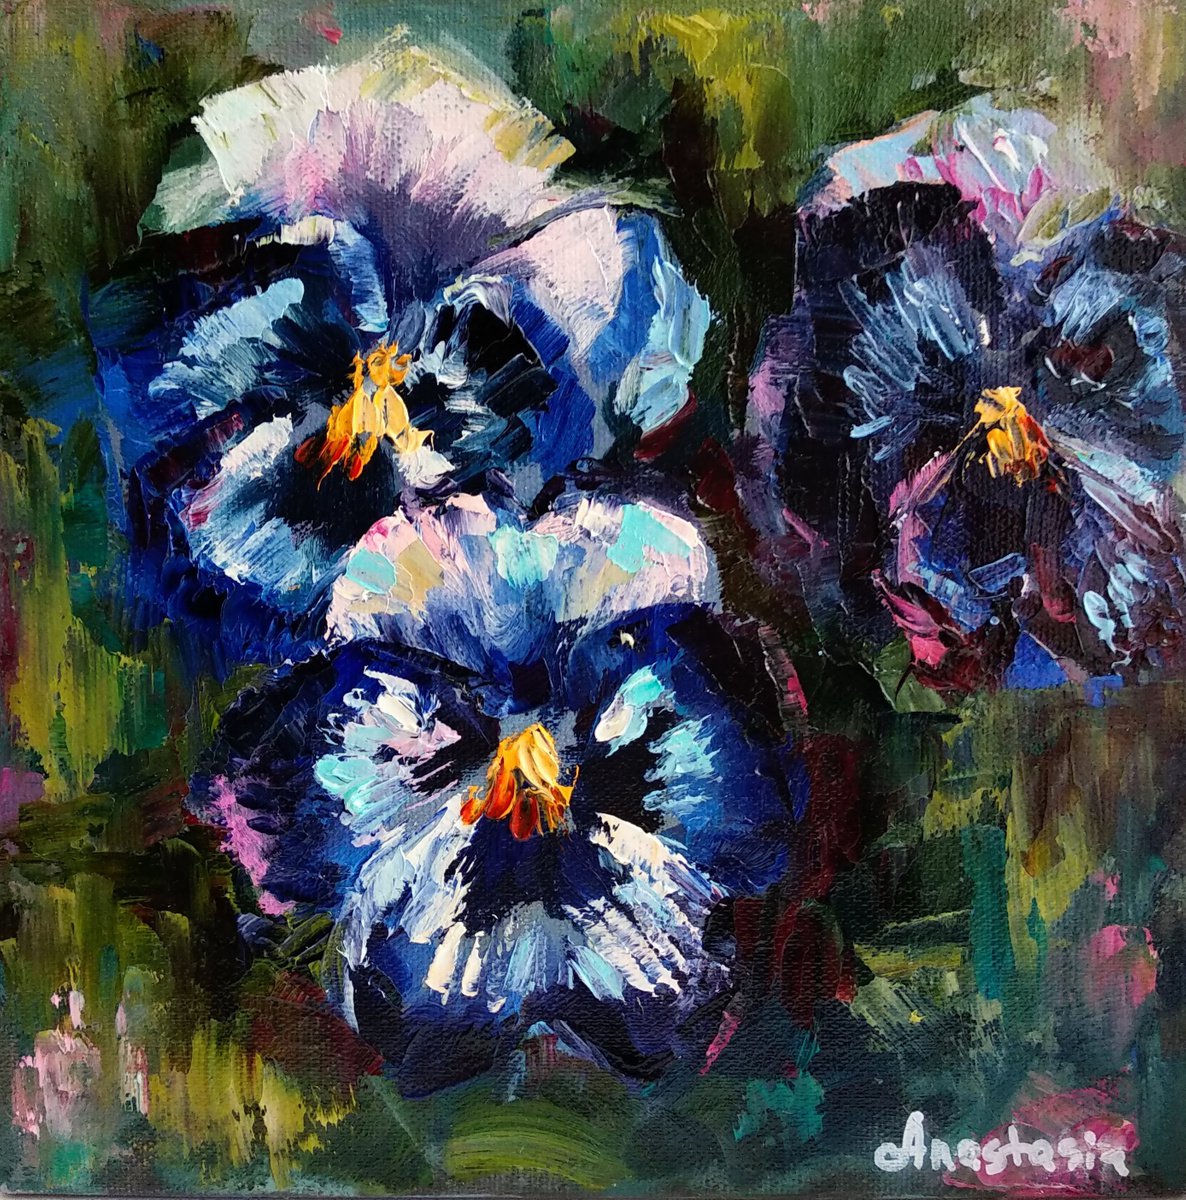 Bouquet of Blue Meadow Wild Flowers Still Life with Flowers Smal Floral Gift by Anastasia Art Line